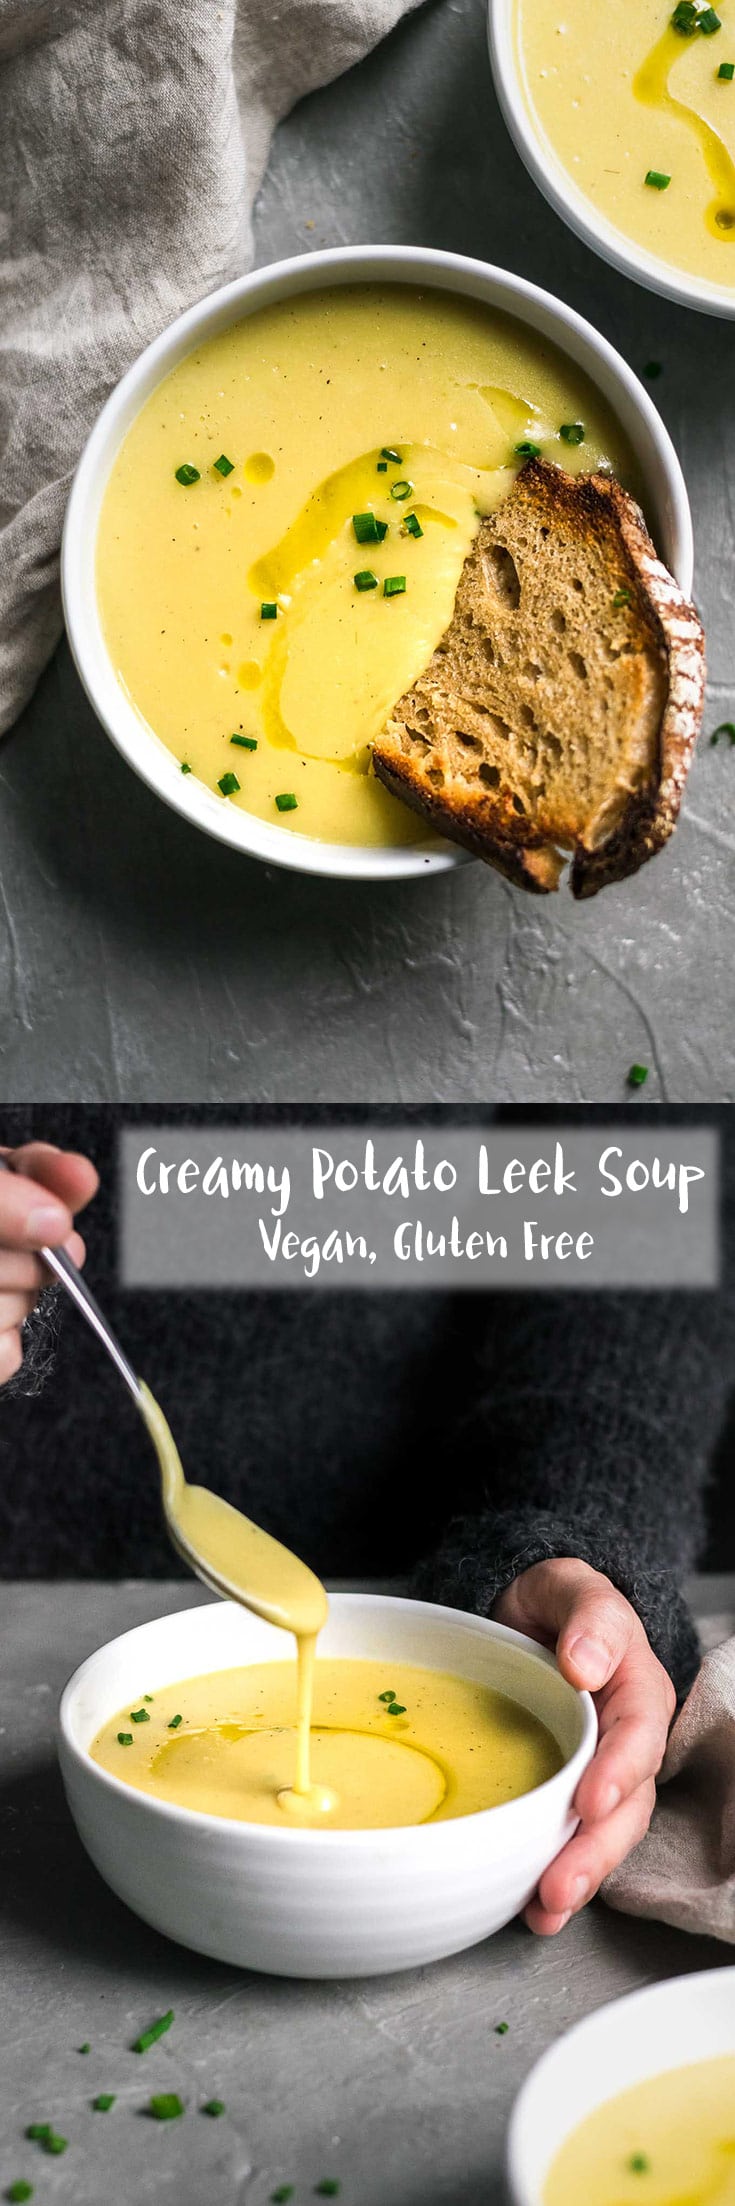 Vegan Potato Leek Soup | This deliciously creamy and flavorful potato leek soup is so easy to make, with just 12 pantry-friendly ingredients, it's ready in just 35 mostly hands off minutes! Naturally gluten free. | thecuriouschickpea.com #vegan #soup #veganrecipes